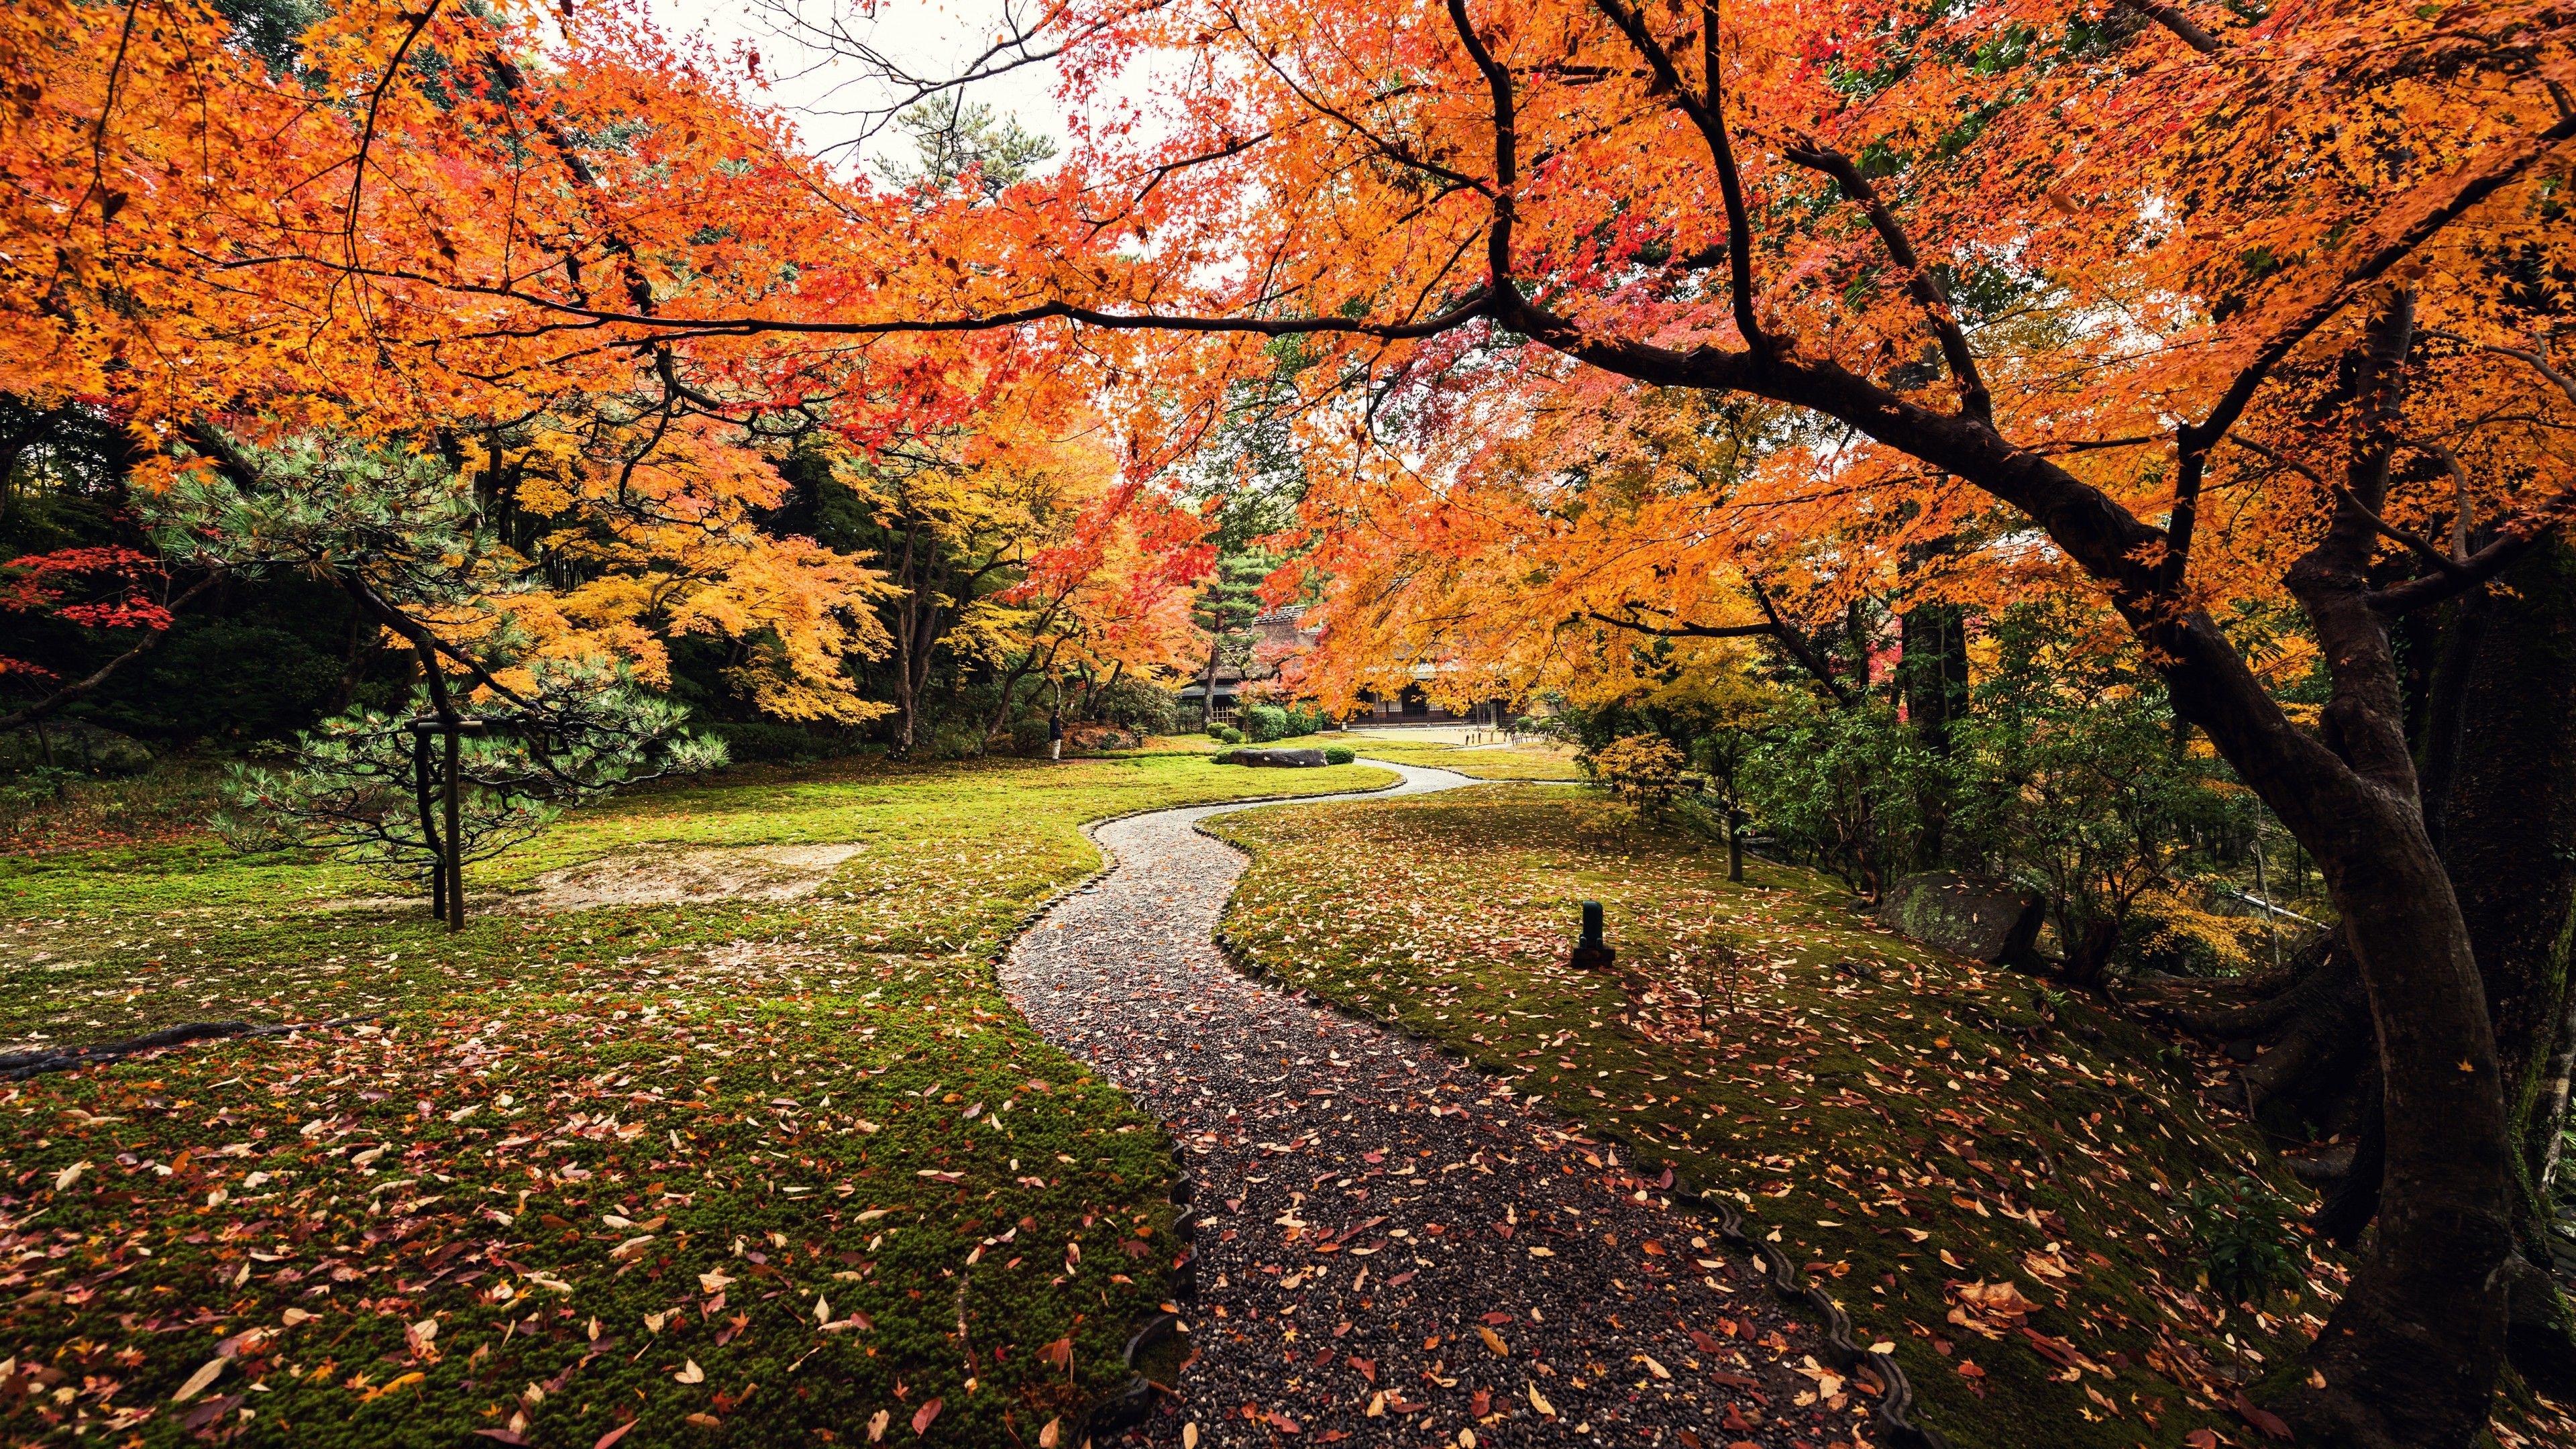 Wallpaper Autumn, Leaves, Yoshikien Garden, Japan, 5K, Nature,. Wallpaper for iPhone, Android, Mobile and Desktop